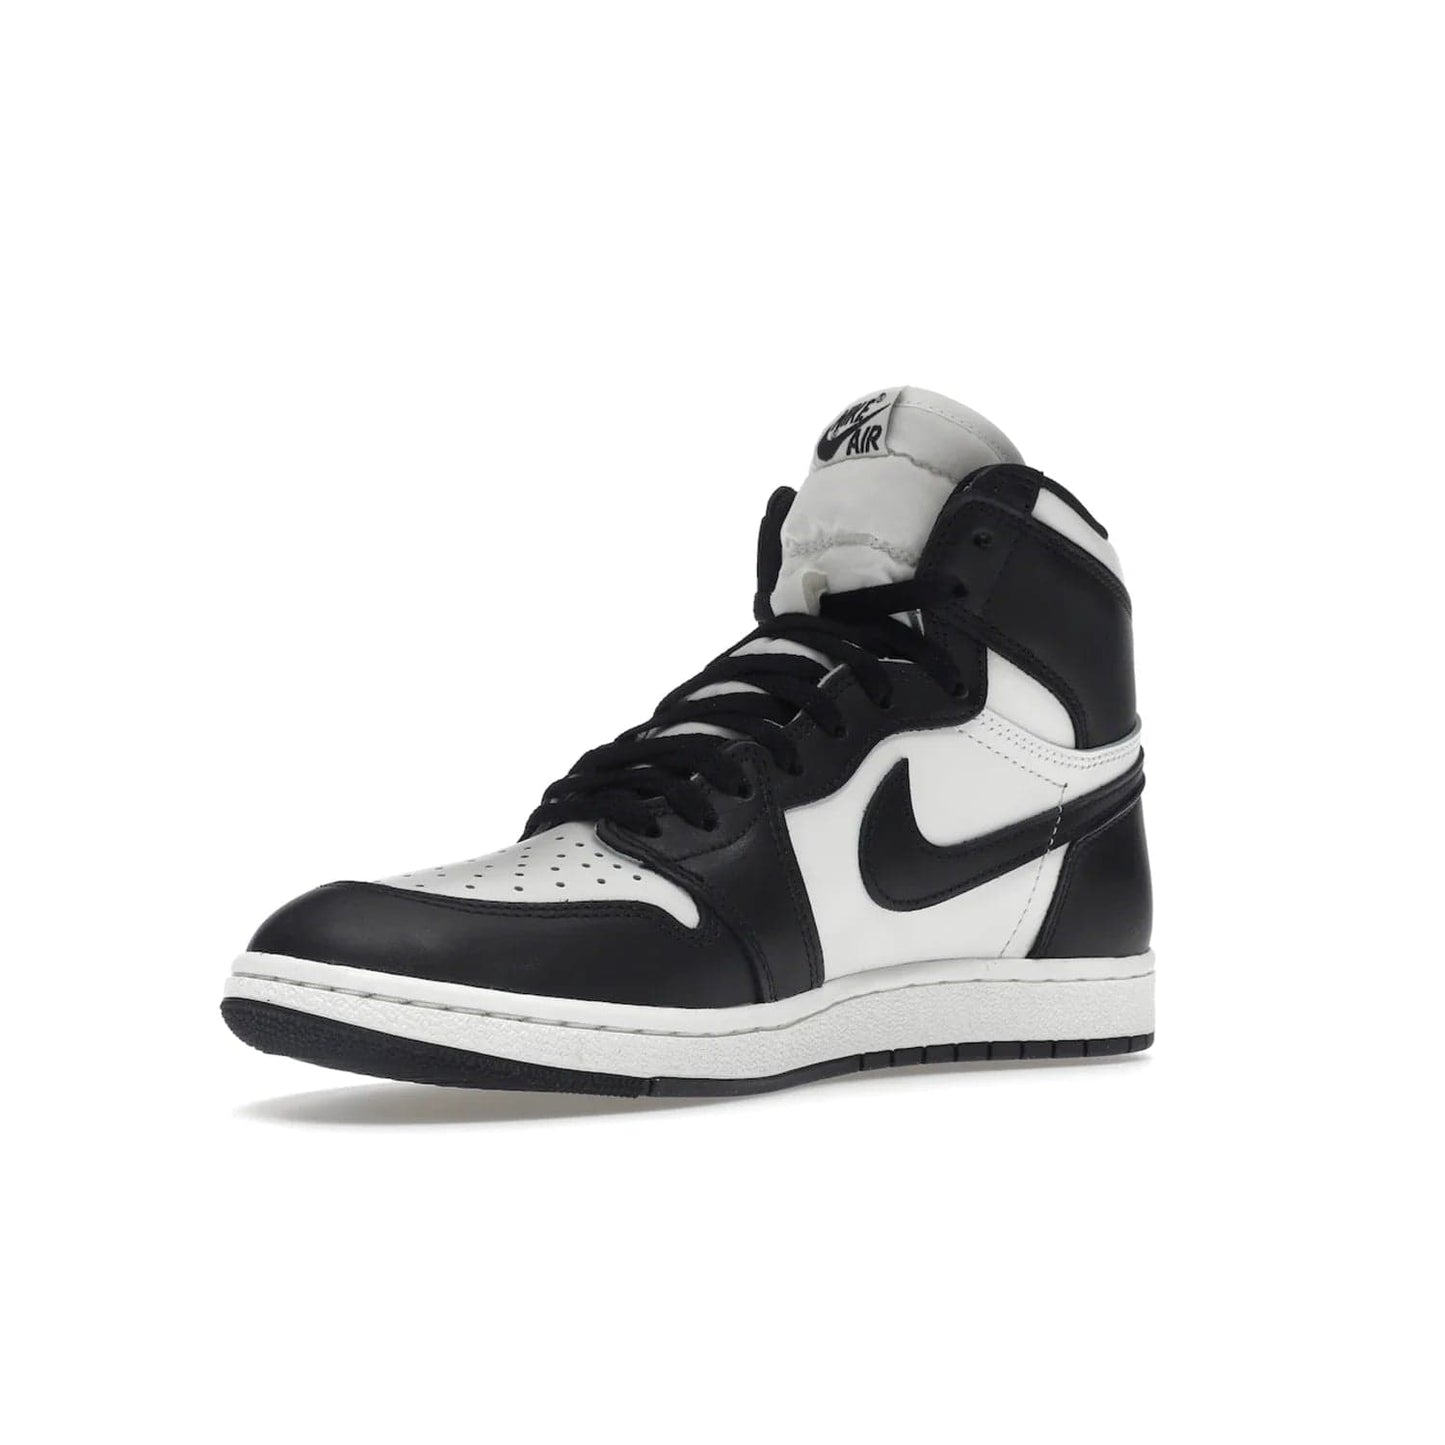 Jordan 1 Retro High 85 Black White (2023) - Image 15 - Only at www.BallersClubKickz.com - Brand new Jordan 1 Retro High 85 Black White (2023) now available. A classic color scheme of black and white leather uppers with signature Nike Air logo on the tongue. Must-have for any Air Jordan fan. Available February 15, 2023.